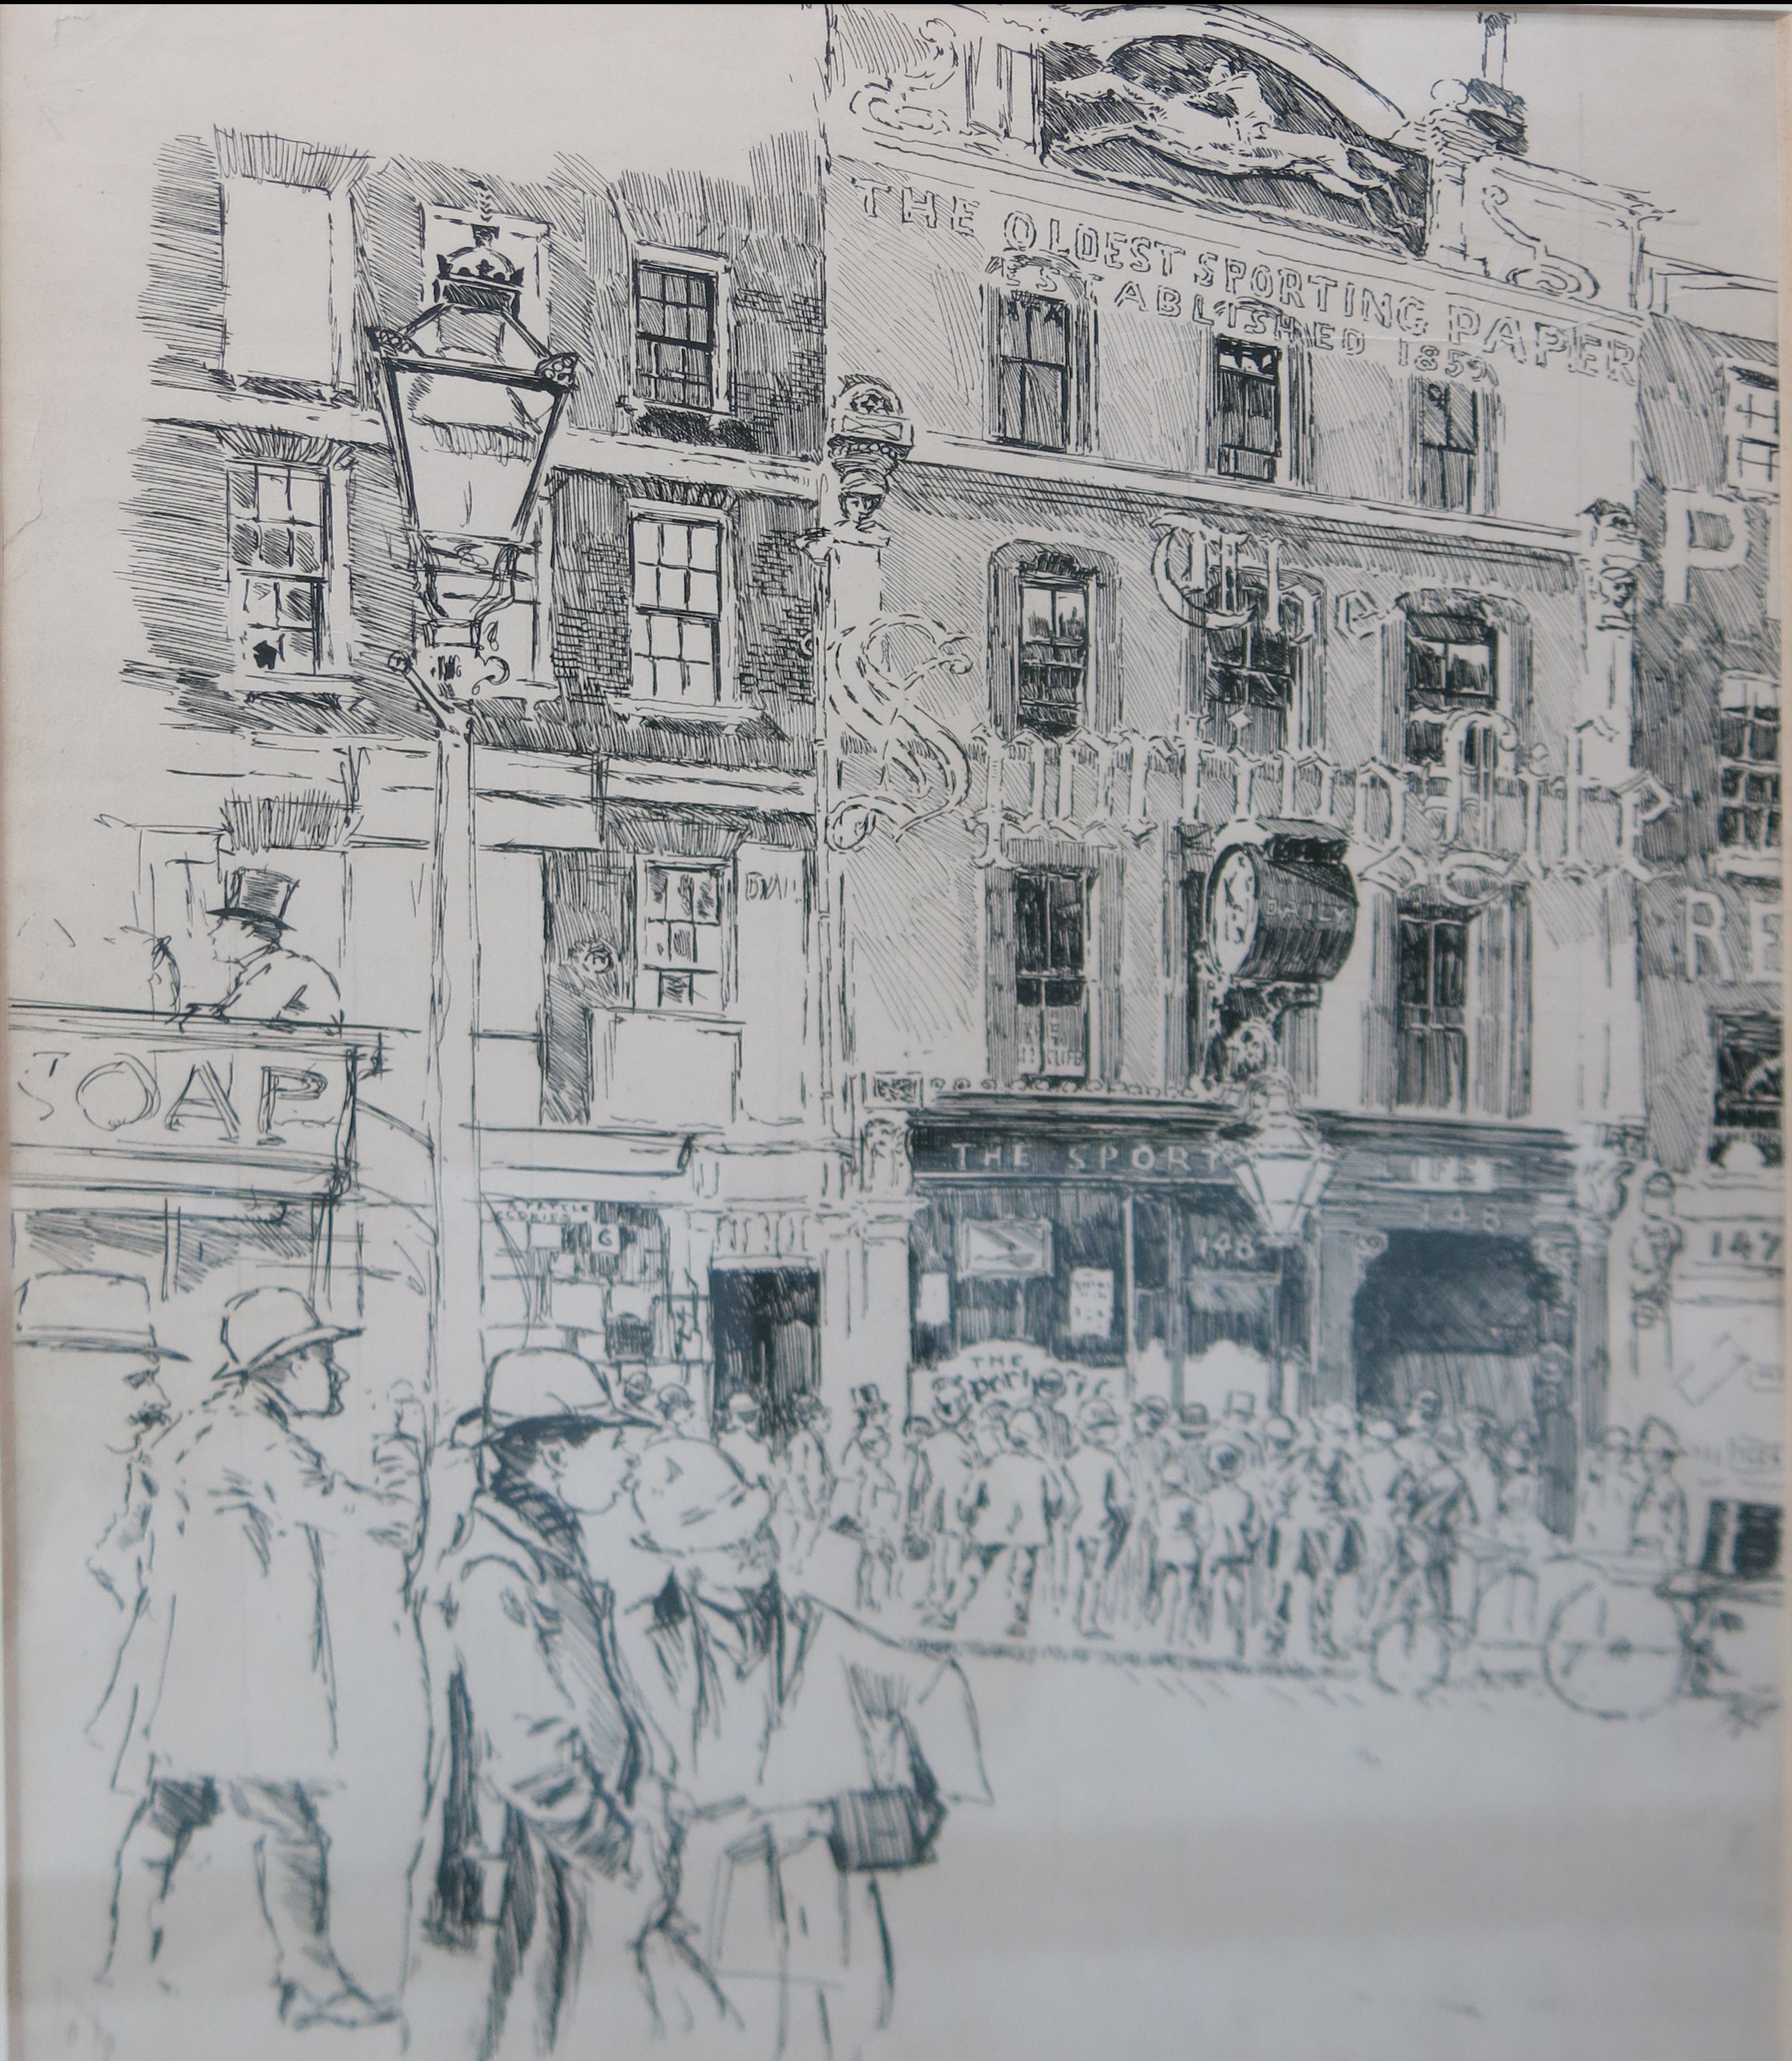 Joseph PENNELL (1858/60-1926) The Sporting Life Building, 148 Fleet Street - Image 2 of 4